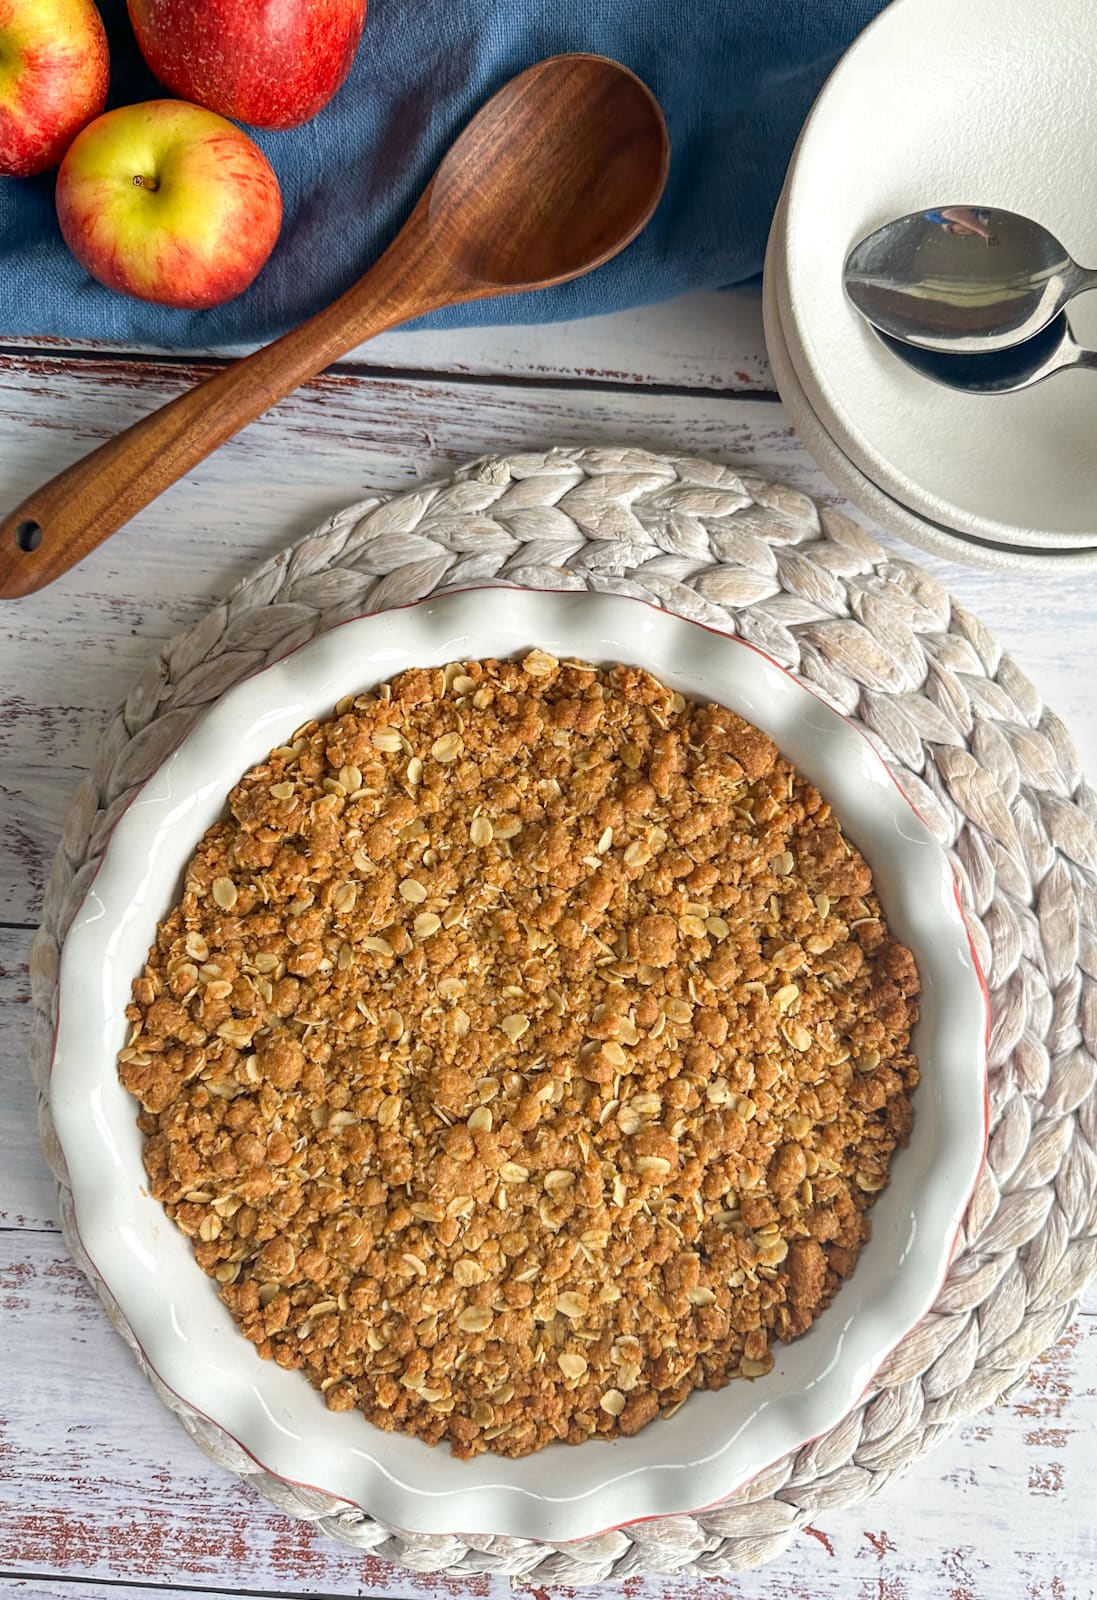 Golden Apple Anzac Crumble freshly baked warm from the oven with fresh apples, a wooden spoon and white bowls ready to serve